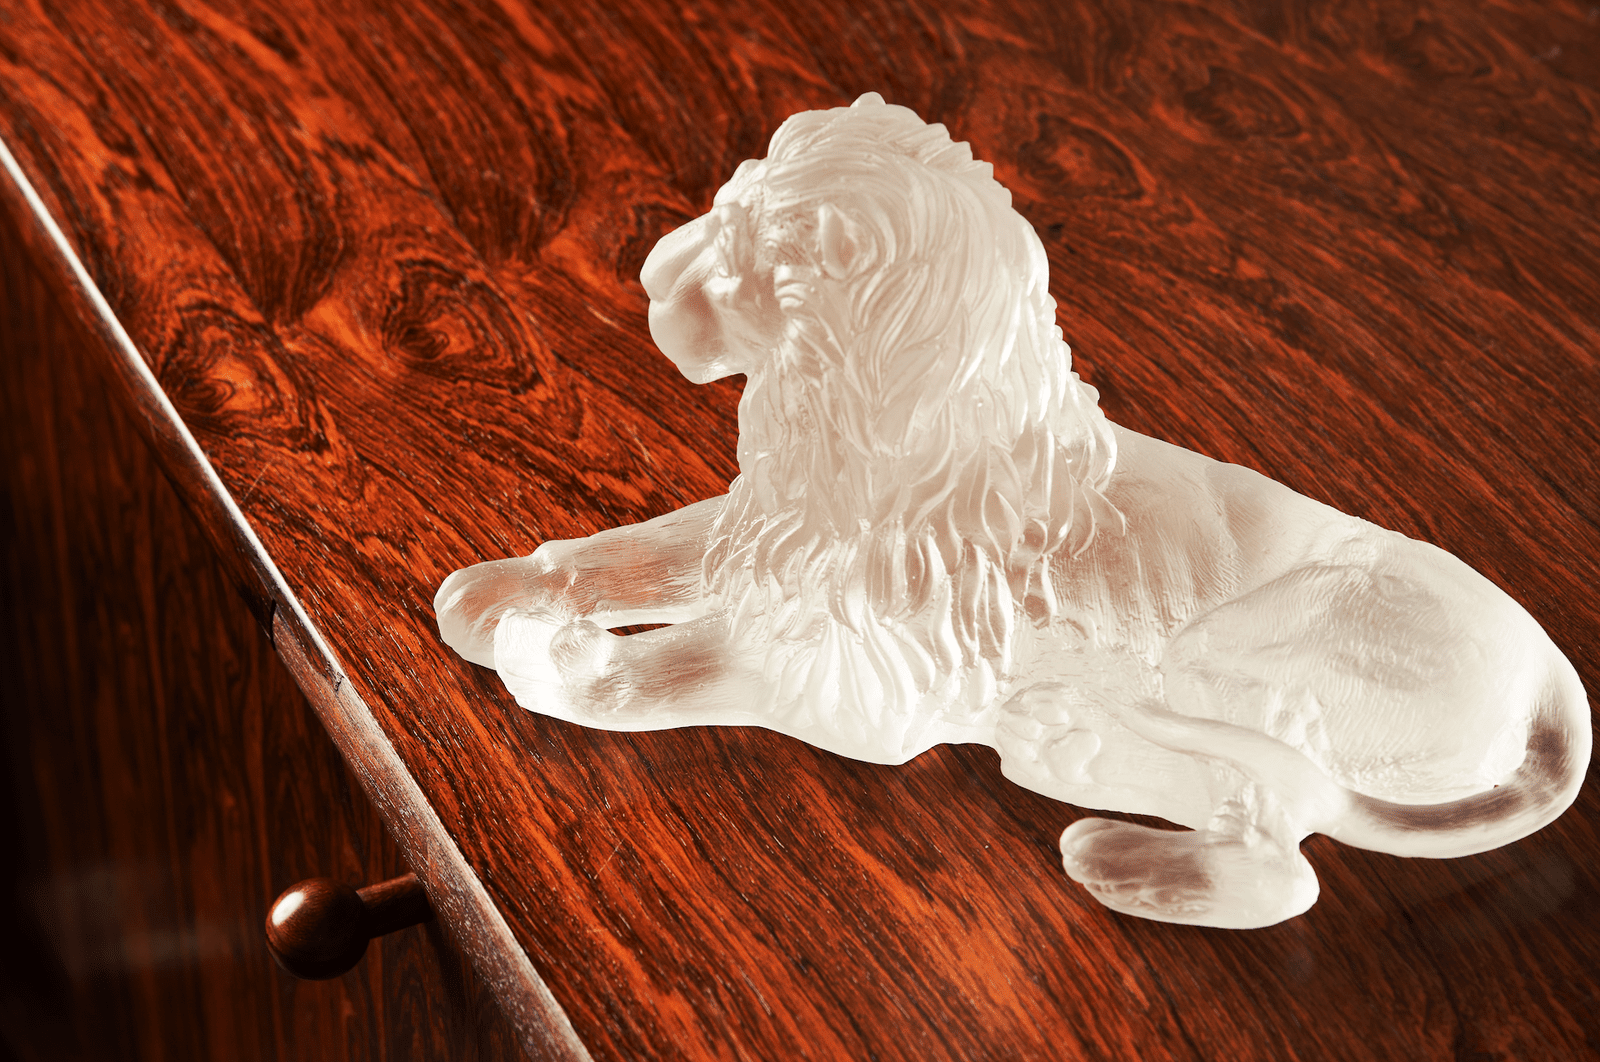 Lion Premium Glass Sculpture Ice on wooden table